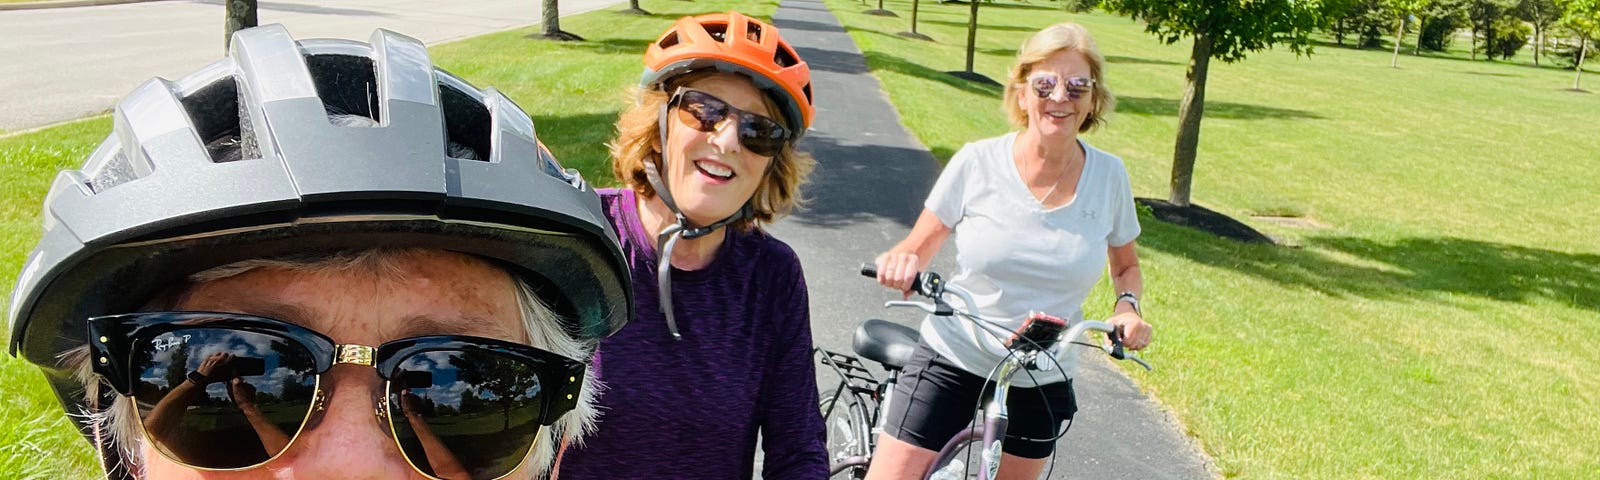 Biking with girlfriends in a City Park to train for a Cycling event in August.